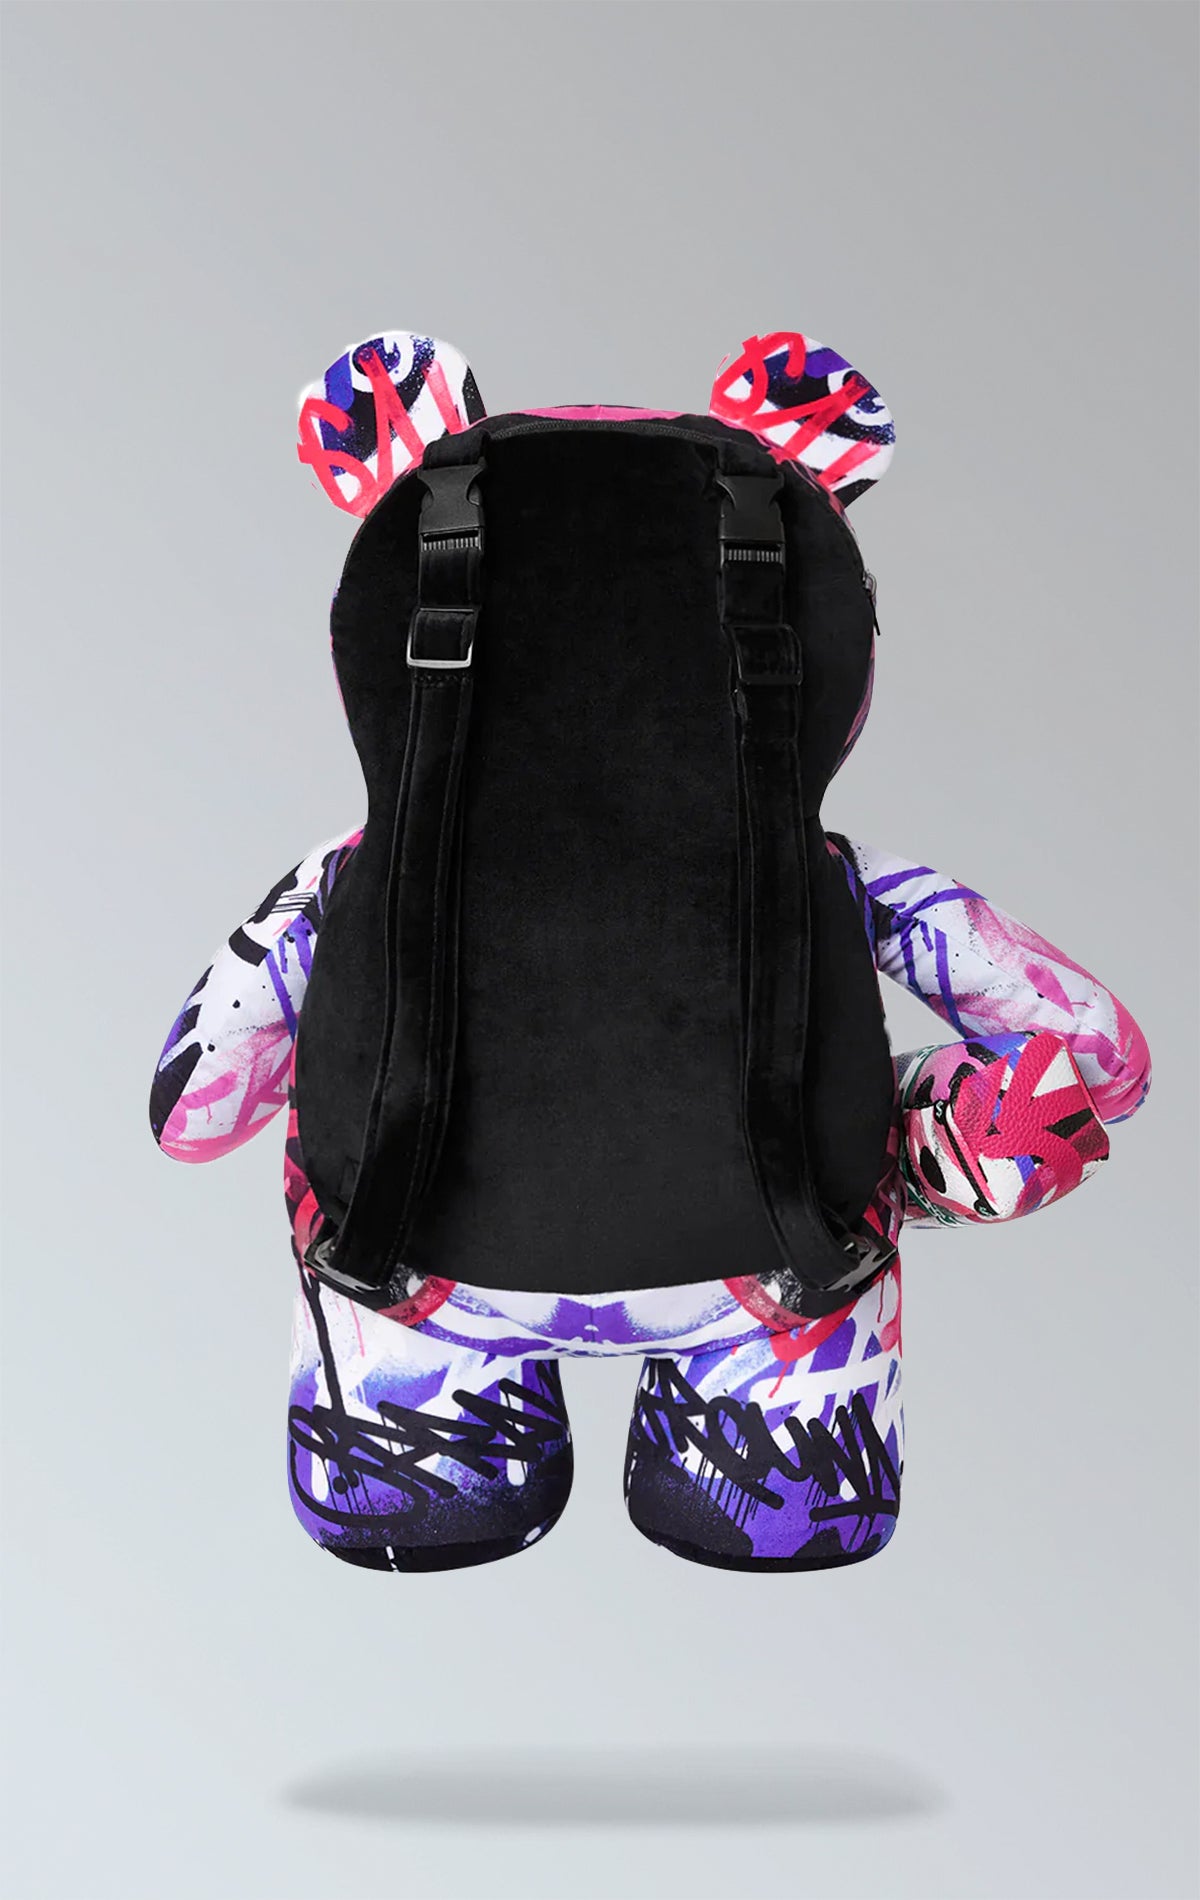 Sprayground purple backpack with Money Bear design, featuring a zippered pocket on the belly, zippered pockets on each arm, a large zippered pocket on the back panel, and adjustable straps. Made from durable water-resistant polyester velour fabric.